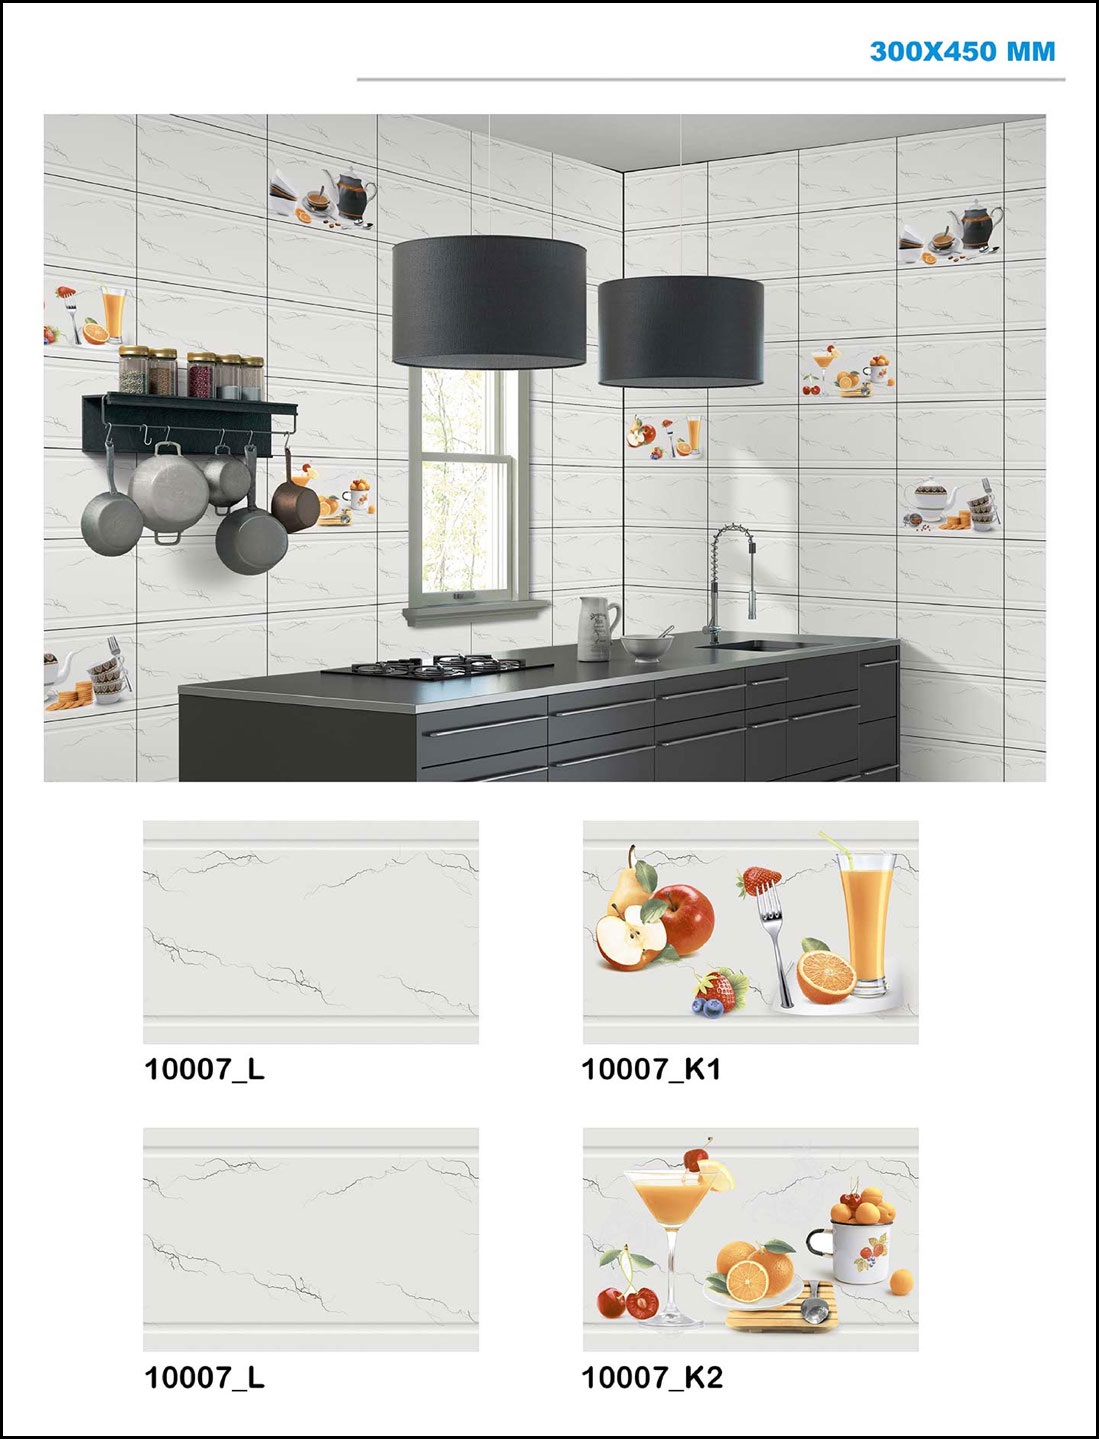 12x18 Kitchen Tiles | 12x18 Kitchen Wall Tiles with texture, color ...